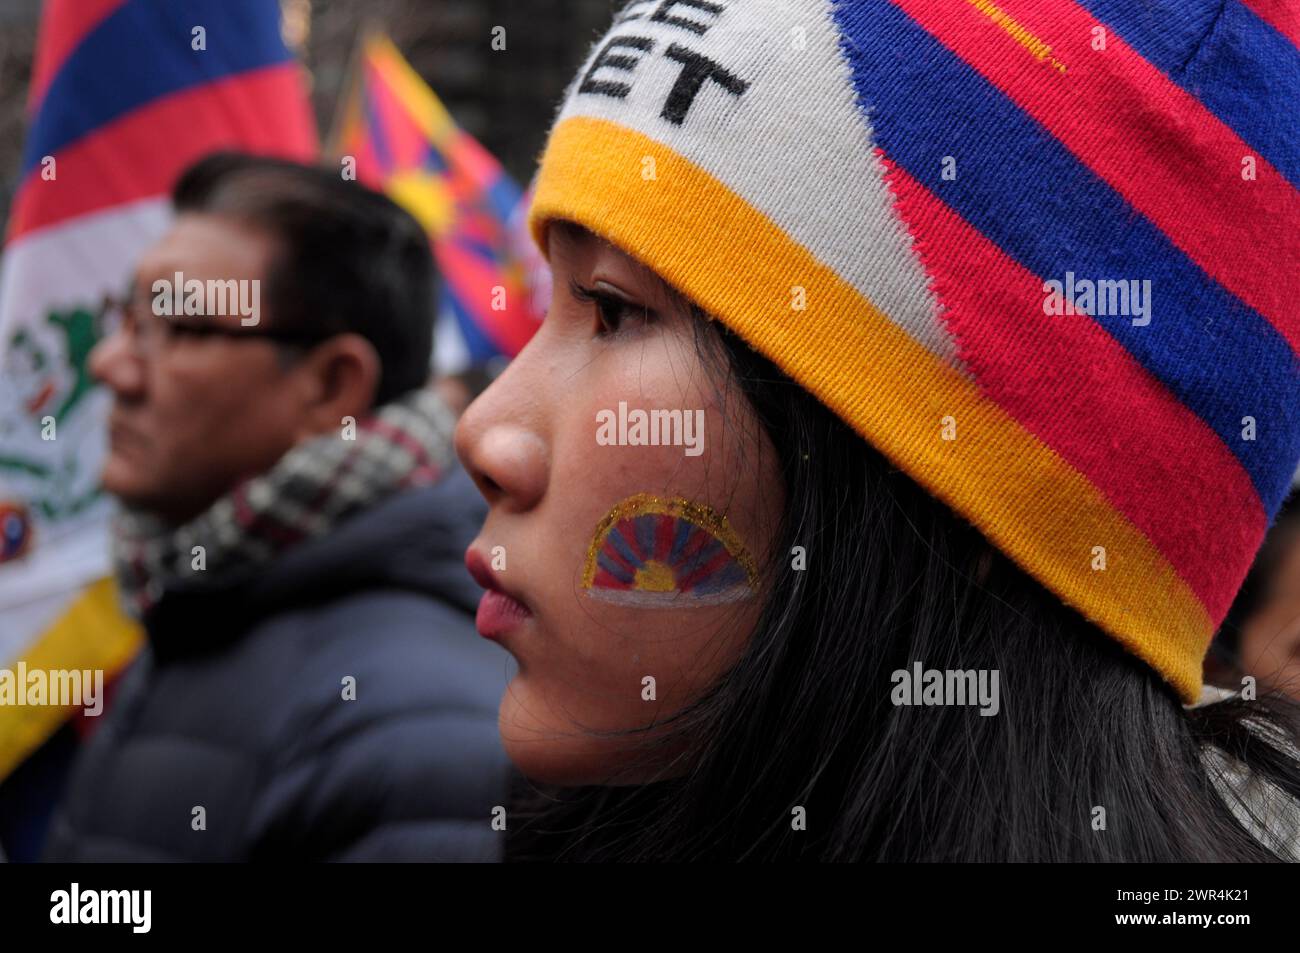 A pro-Tibet demonstrator with the Tibetan flag painted on her cheek, rallies at Dag Hammarskjöld Plaza near the United Nations building during the 65th Tibetan Uprising Day. Demonstrators rallied in Manhattan, New York City demanding Tibet's independence from China. The Tibetan Uprising Day marks the day in 1959 when thousands of Tibetans in Tibet surrounded the palace of the current and 14th Dalai Lama. The Dalai Lama is the spiritual Buddhist leader of Tibetans worldwide. The Tibetans surrounded the palace in 1959 to protect the Dalai Lama due to fears of a Chinese government plot to abduct Stock Photo